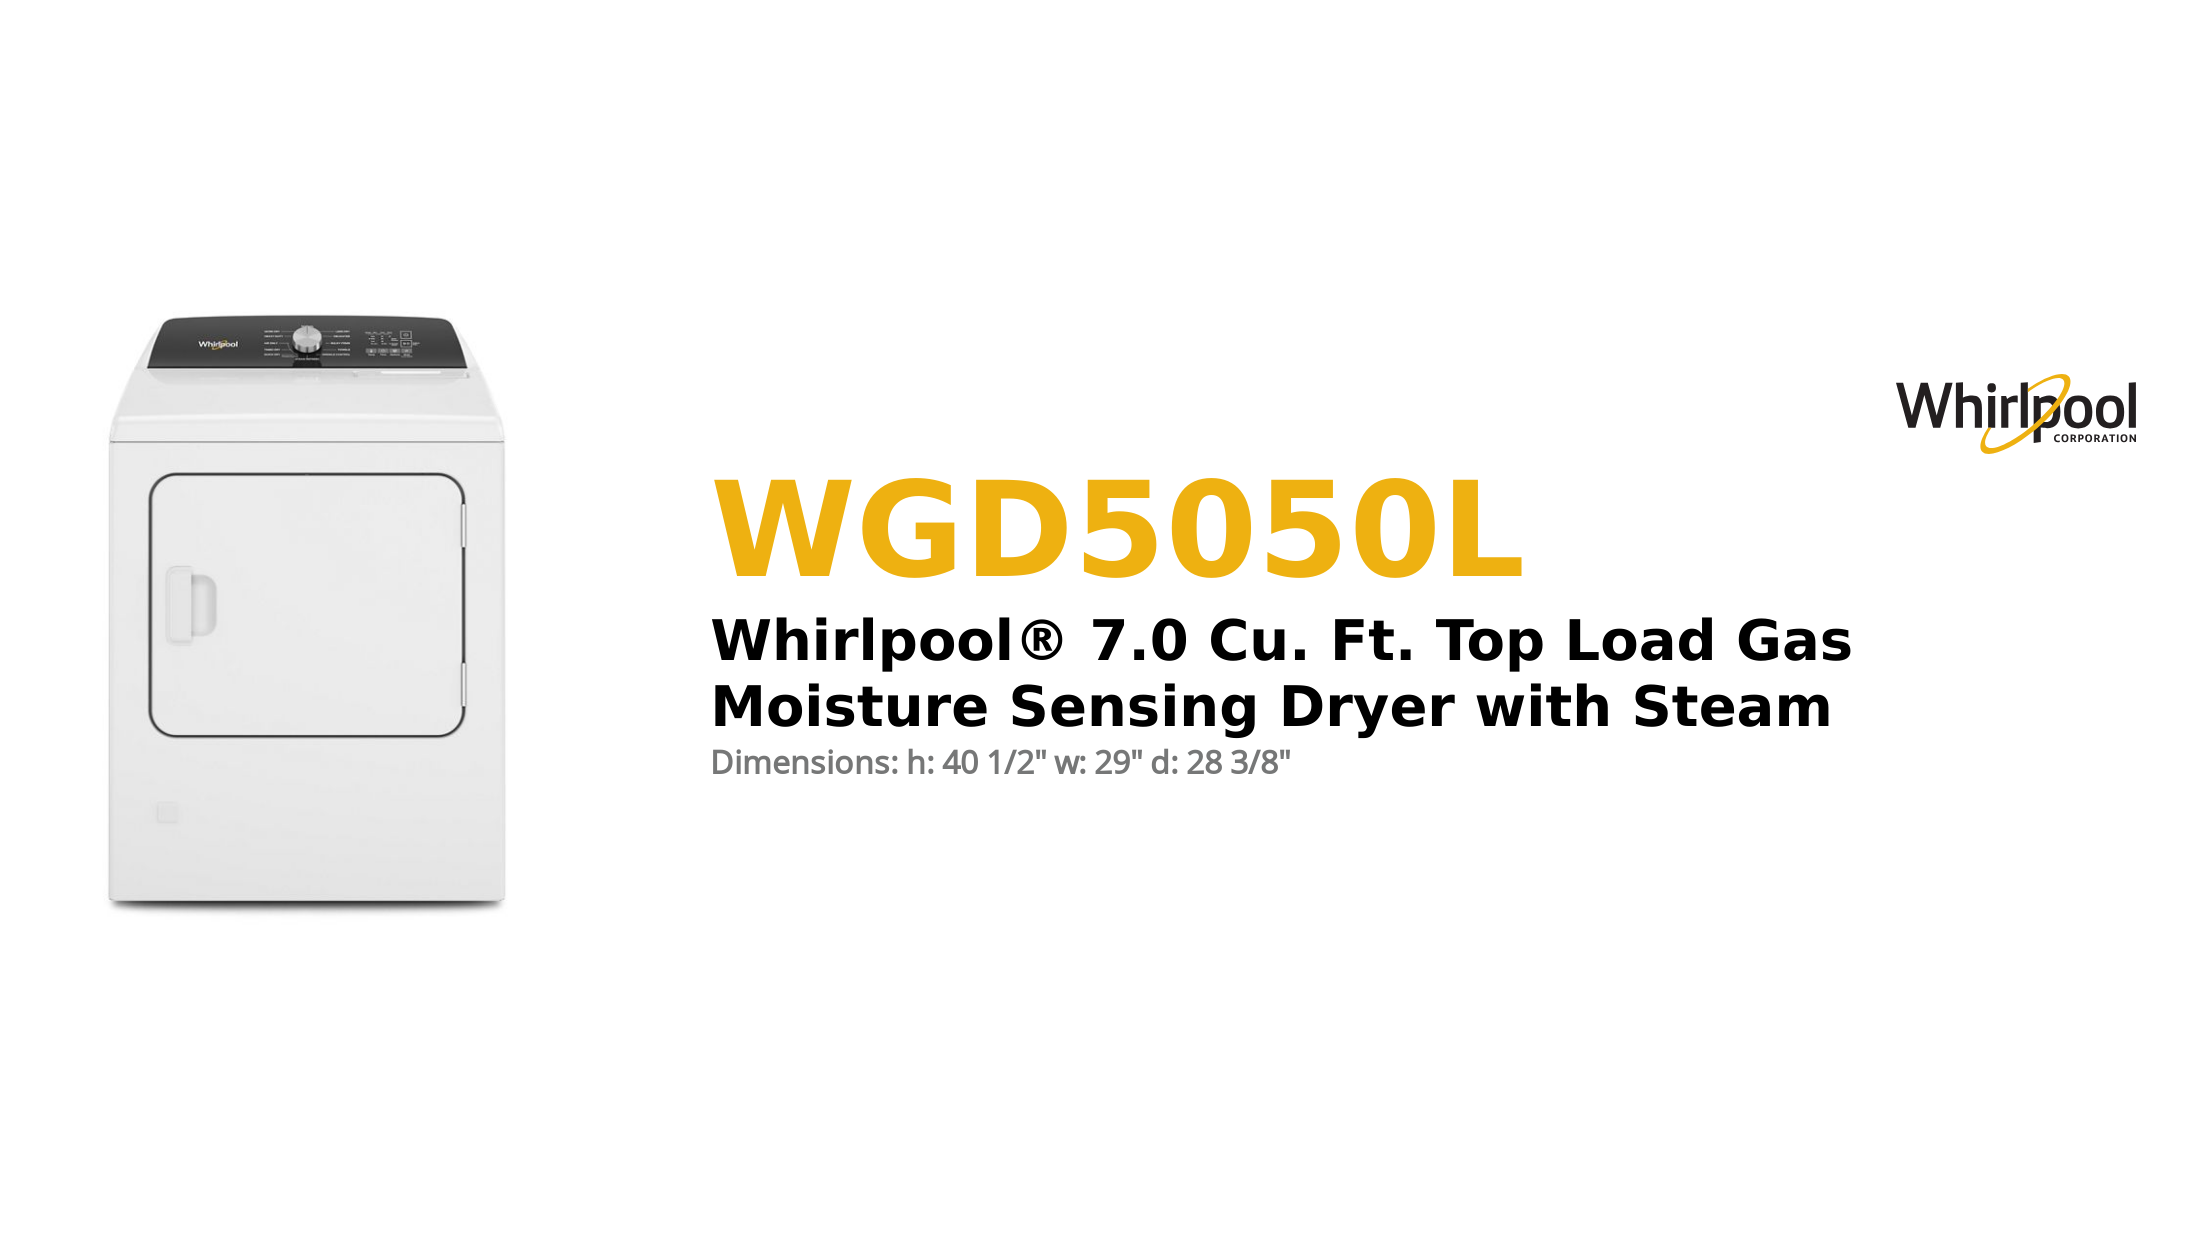 Whirlpool® 7.0 Cu. Ft. Top Load Gas Moisture Sensing Dryer with Steam